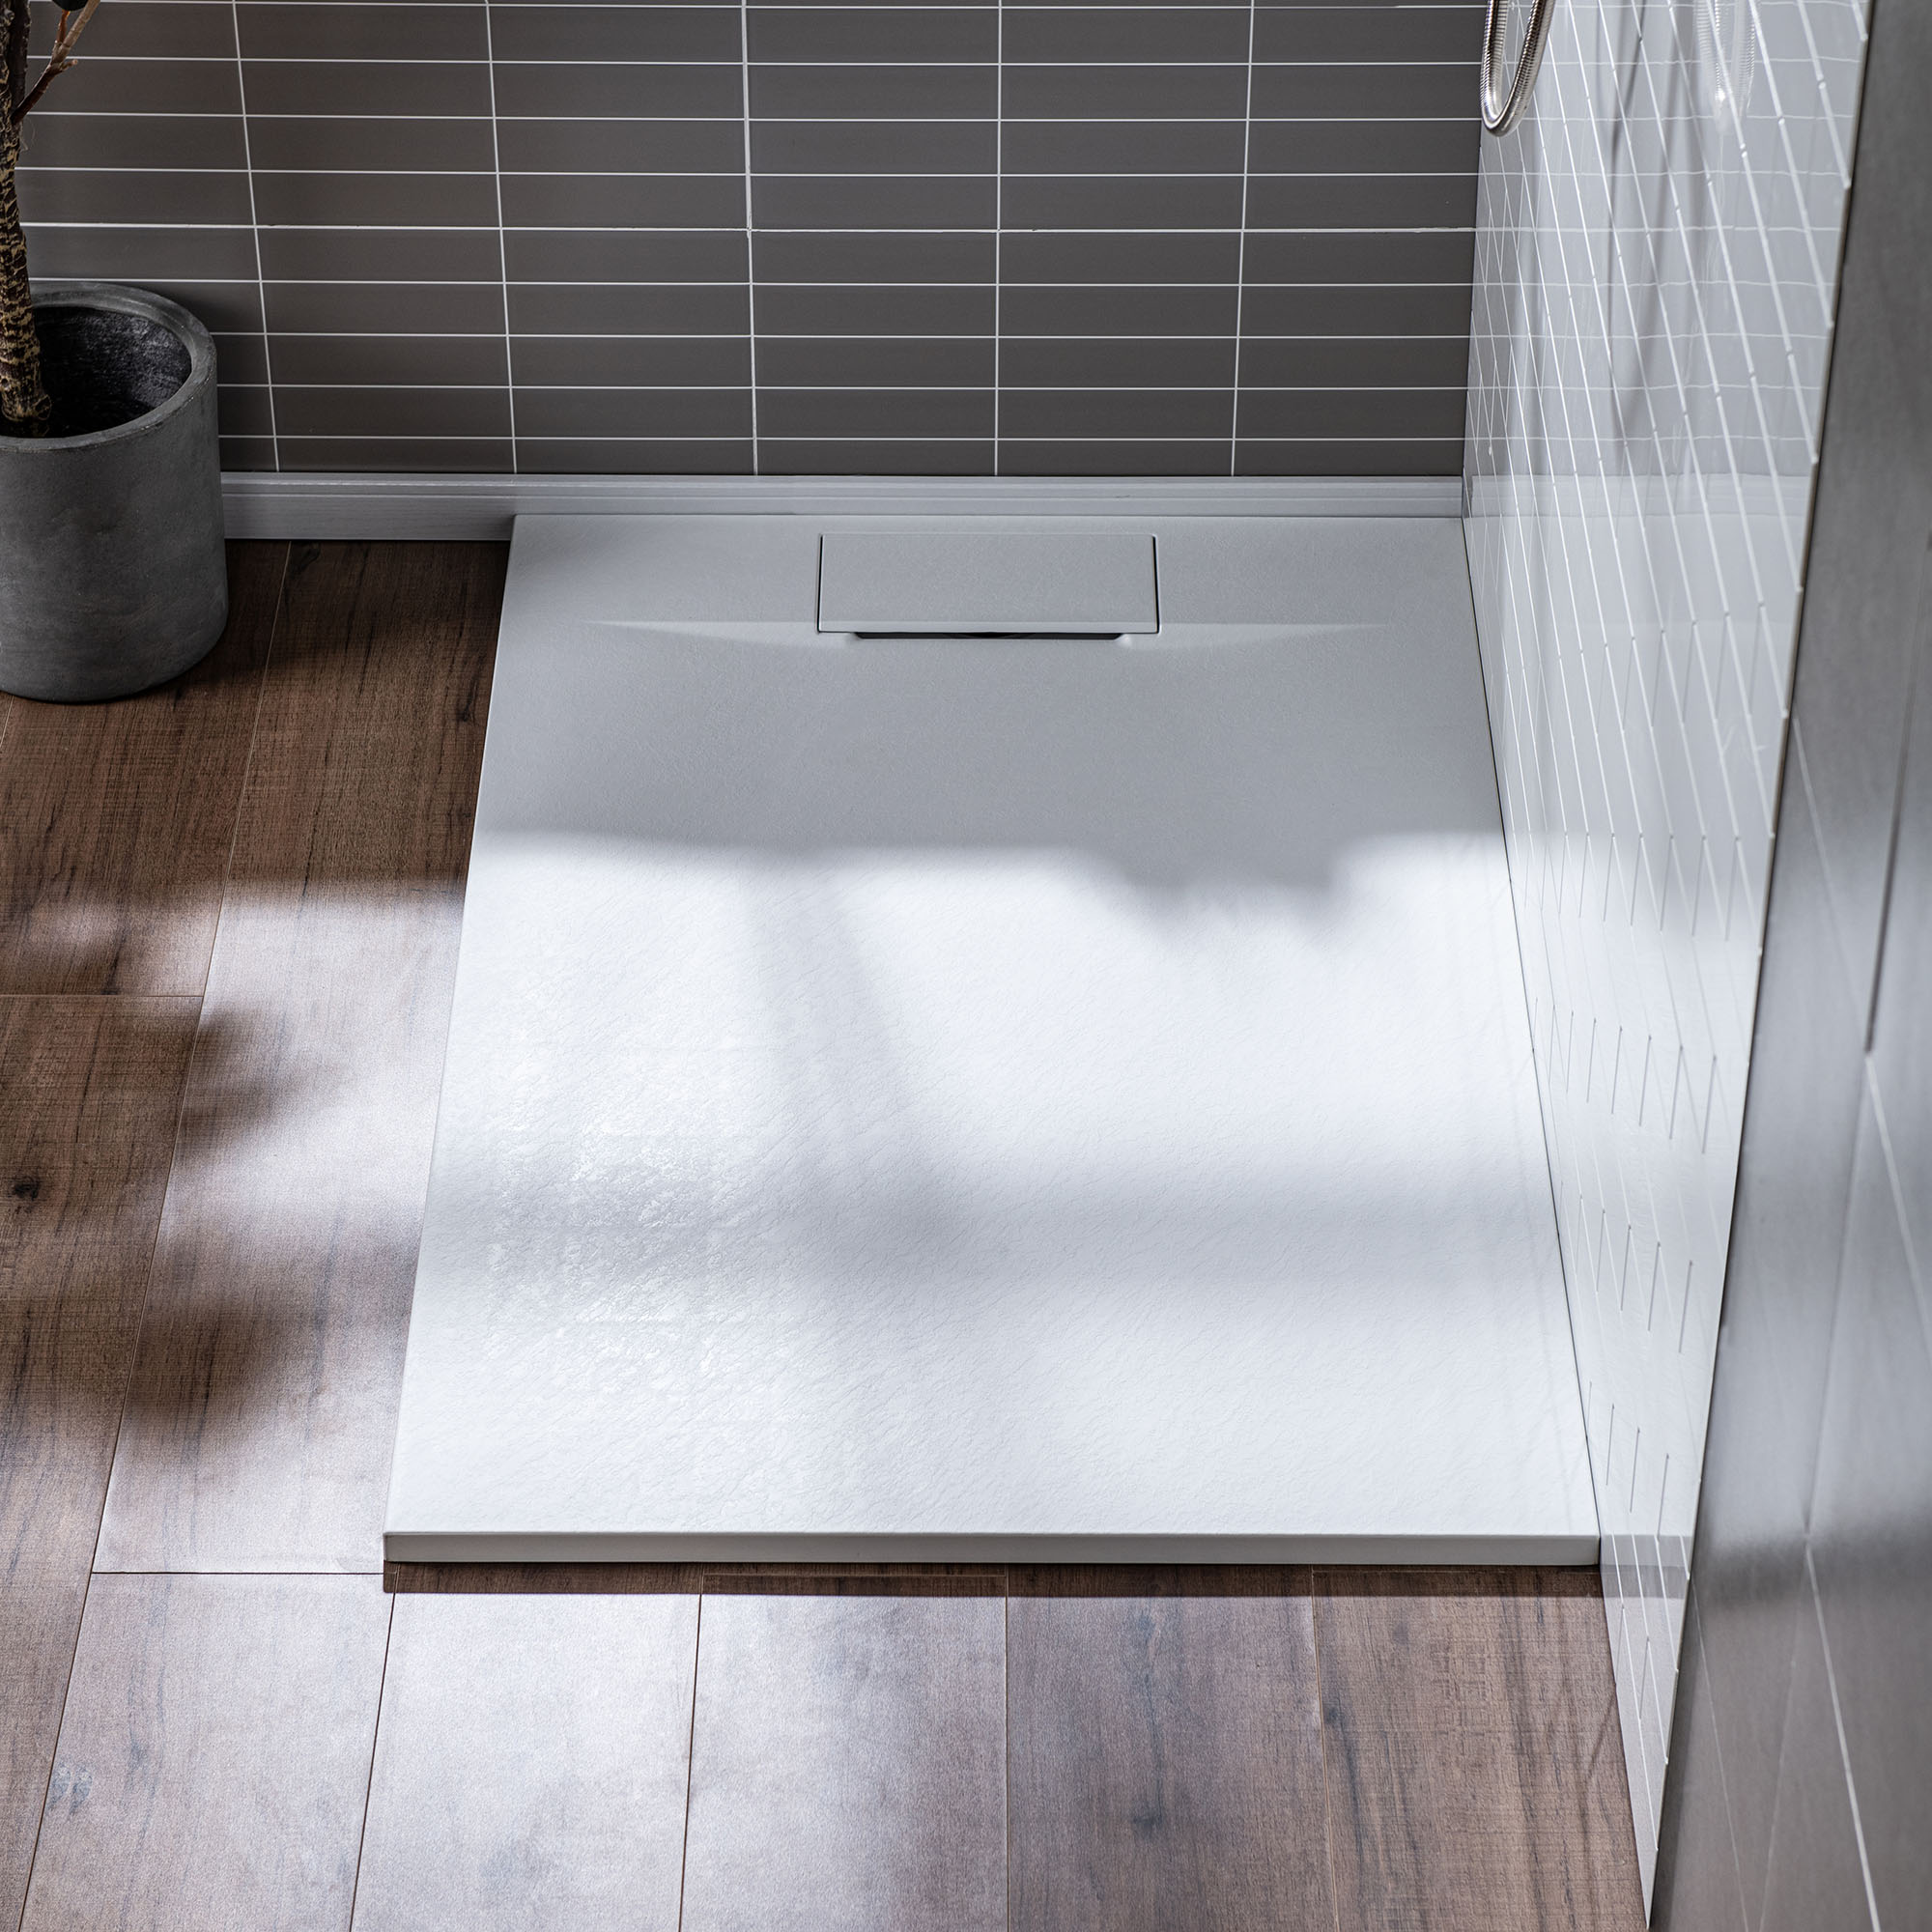  WOODBRIDGE 48-in L x 36-in W Zero Threshold End Drain Shower Base with Reversable Drain Placement, Matching Decorative Drain Plate and Tile Flange, Wheel Chair Access, Low Profile, White_12408